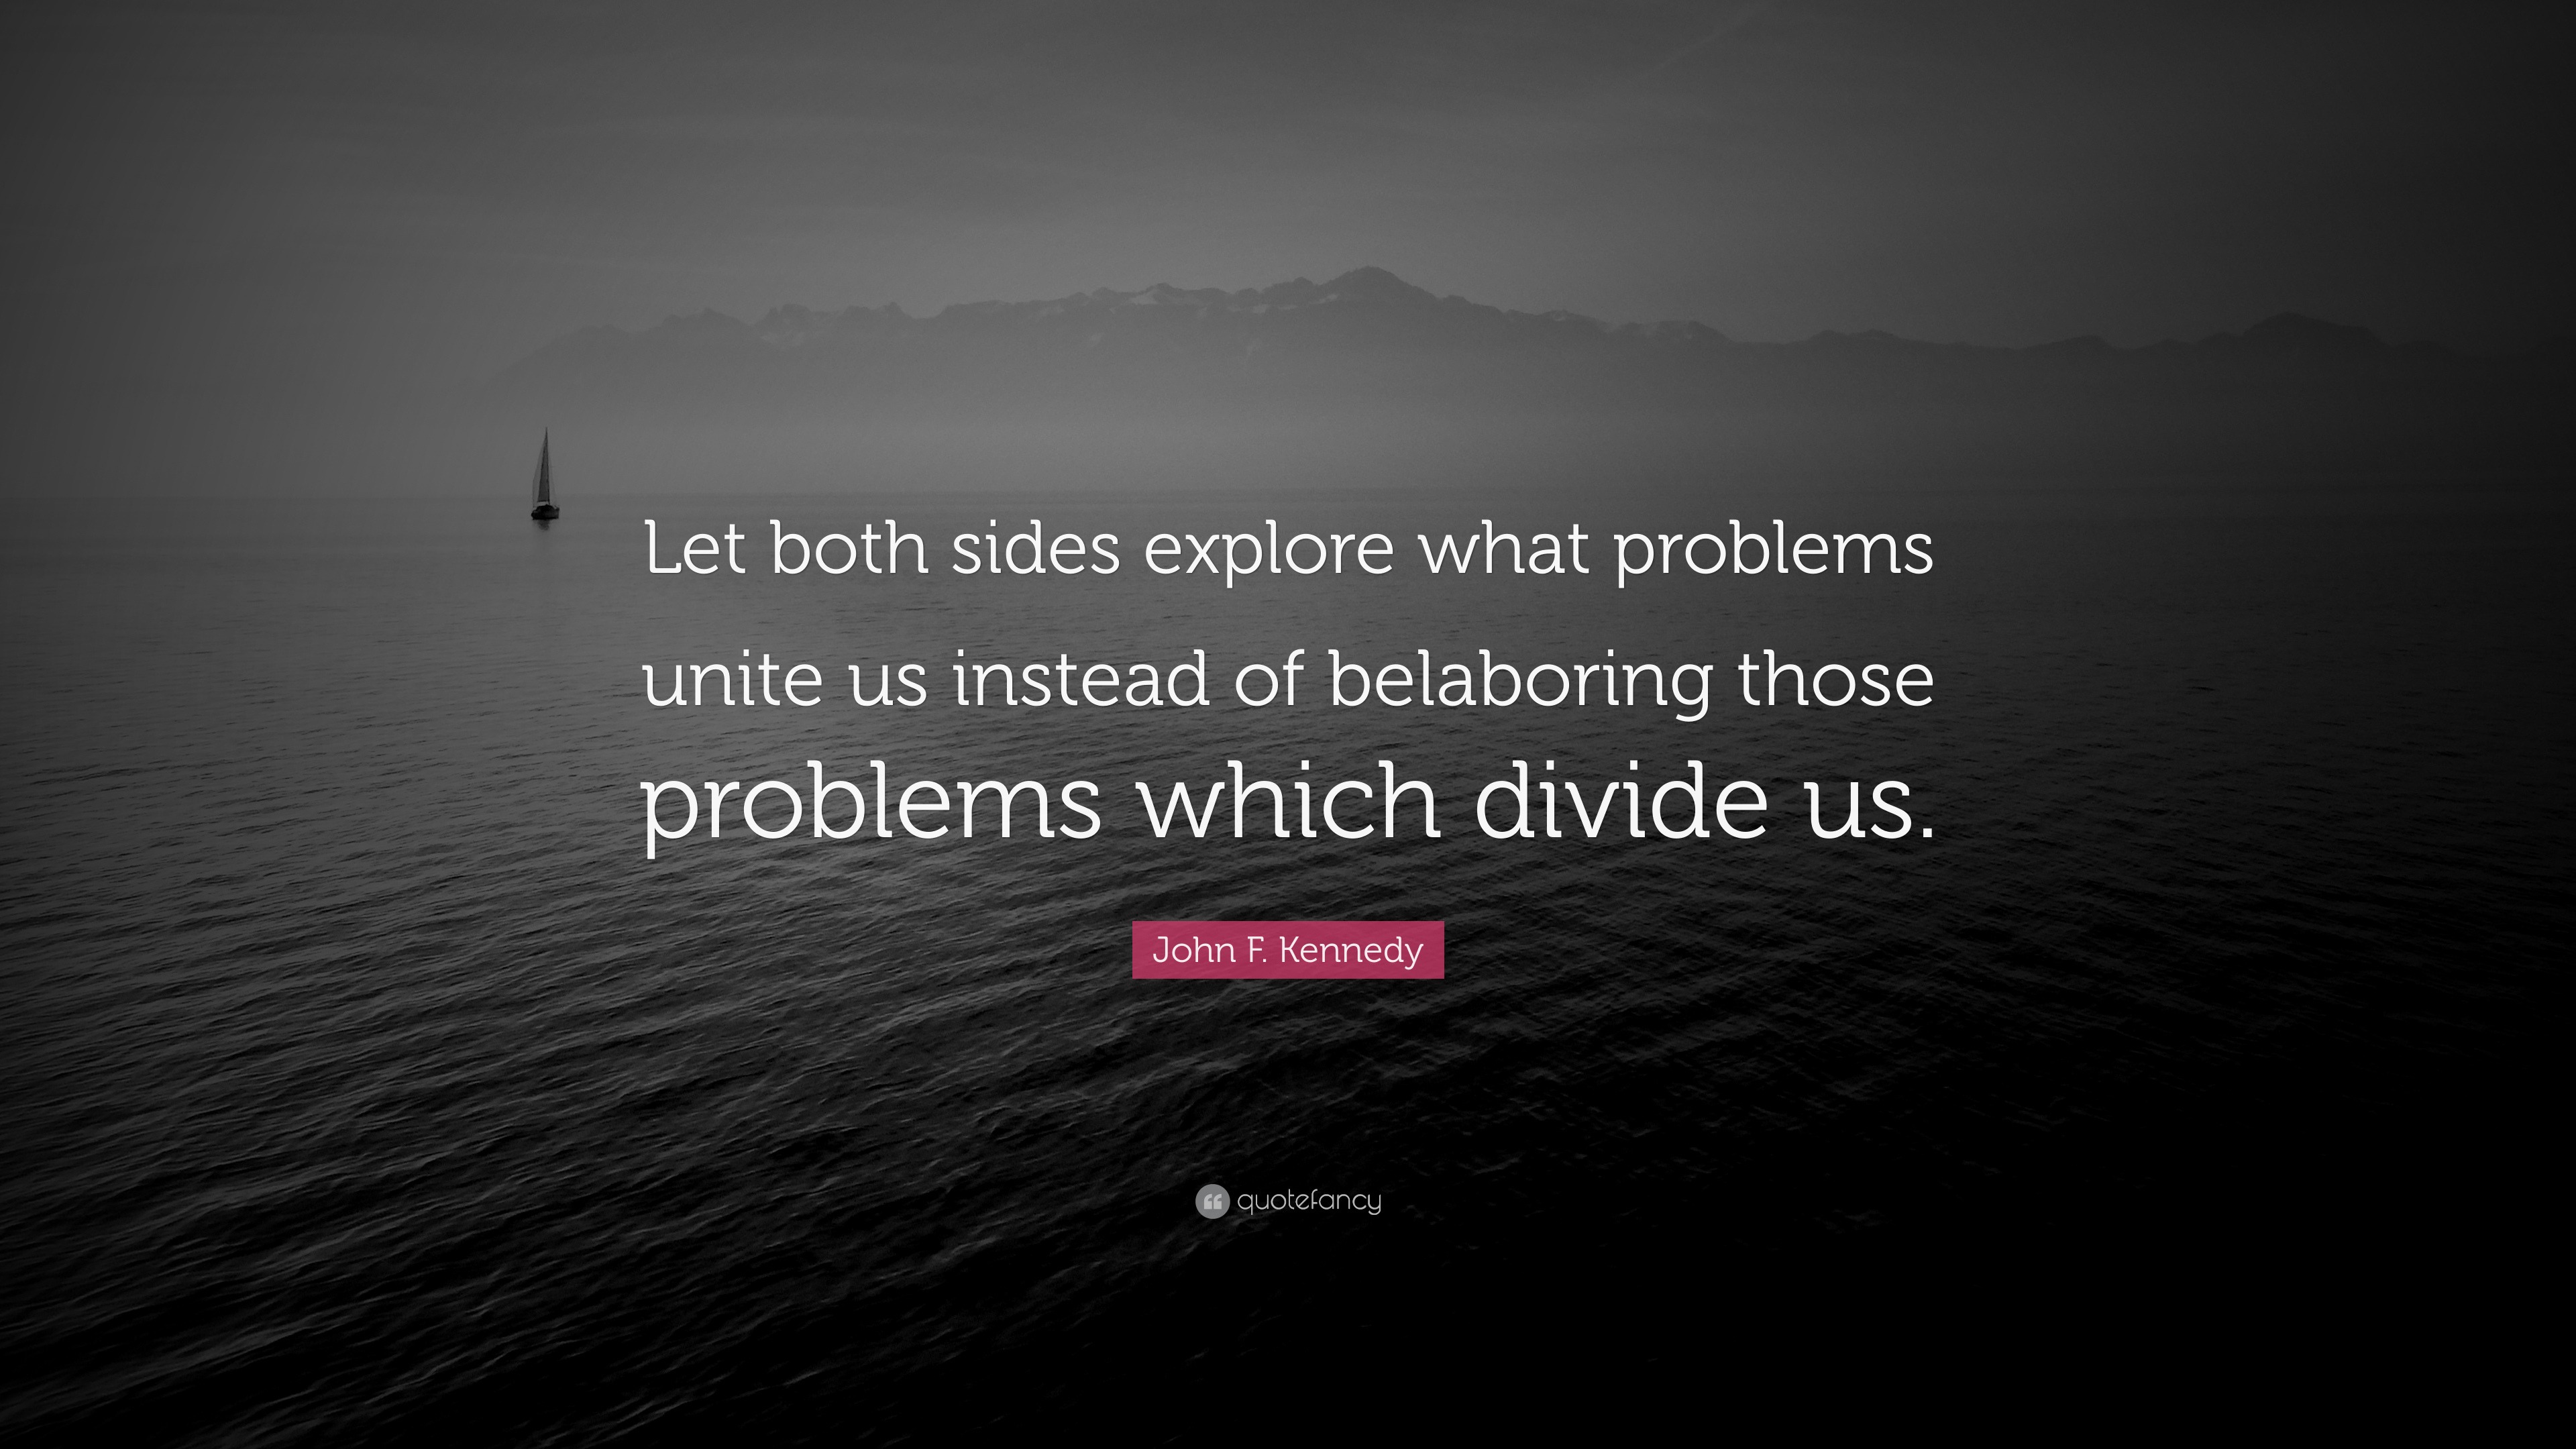 https://quotefancy.com/media/wallpaper/3840x2160/2403308-John-F-Kennedy-Quote-Let-both-sides-explore-what-problems-unite-us.jpg